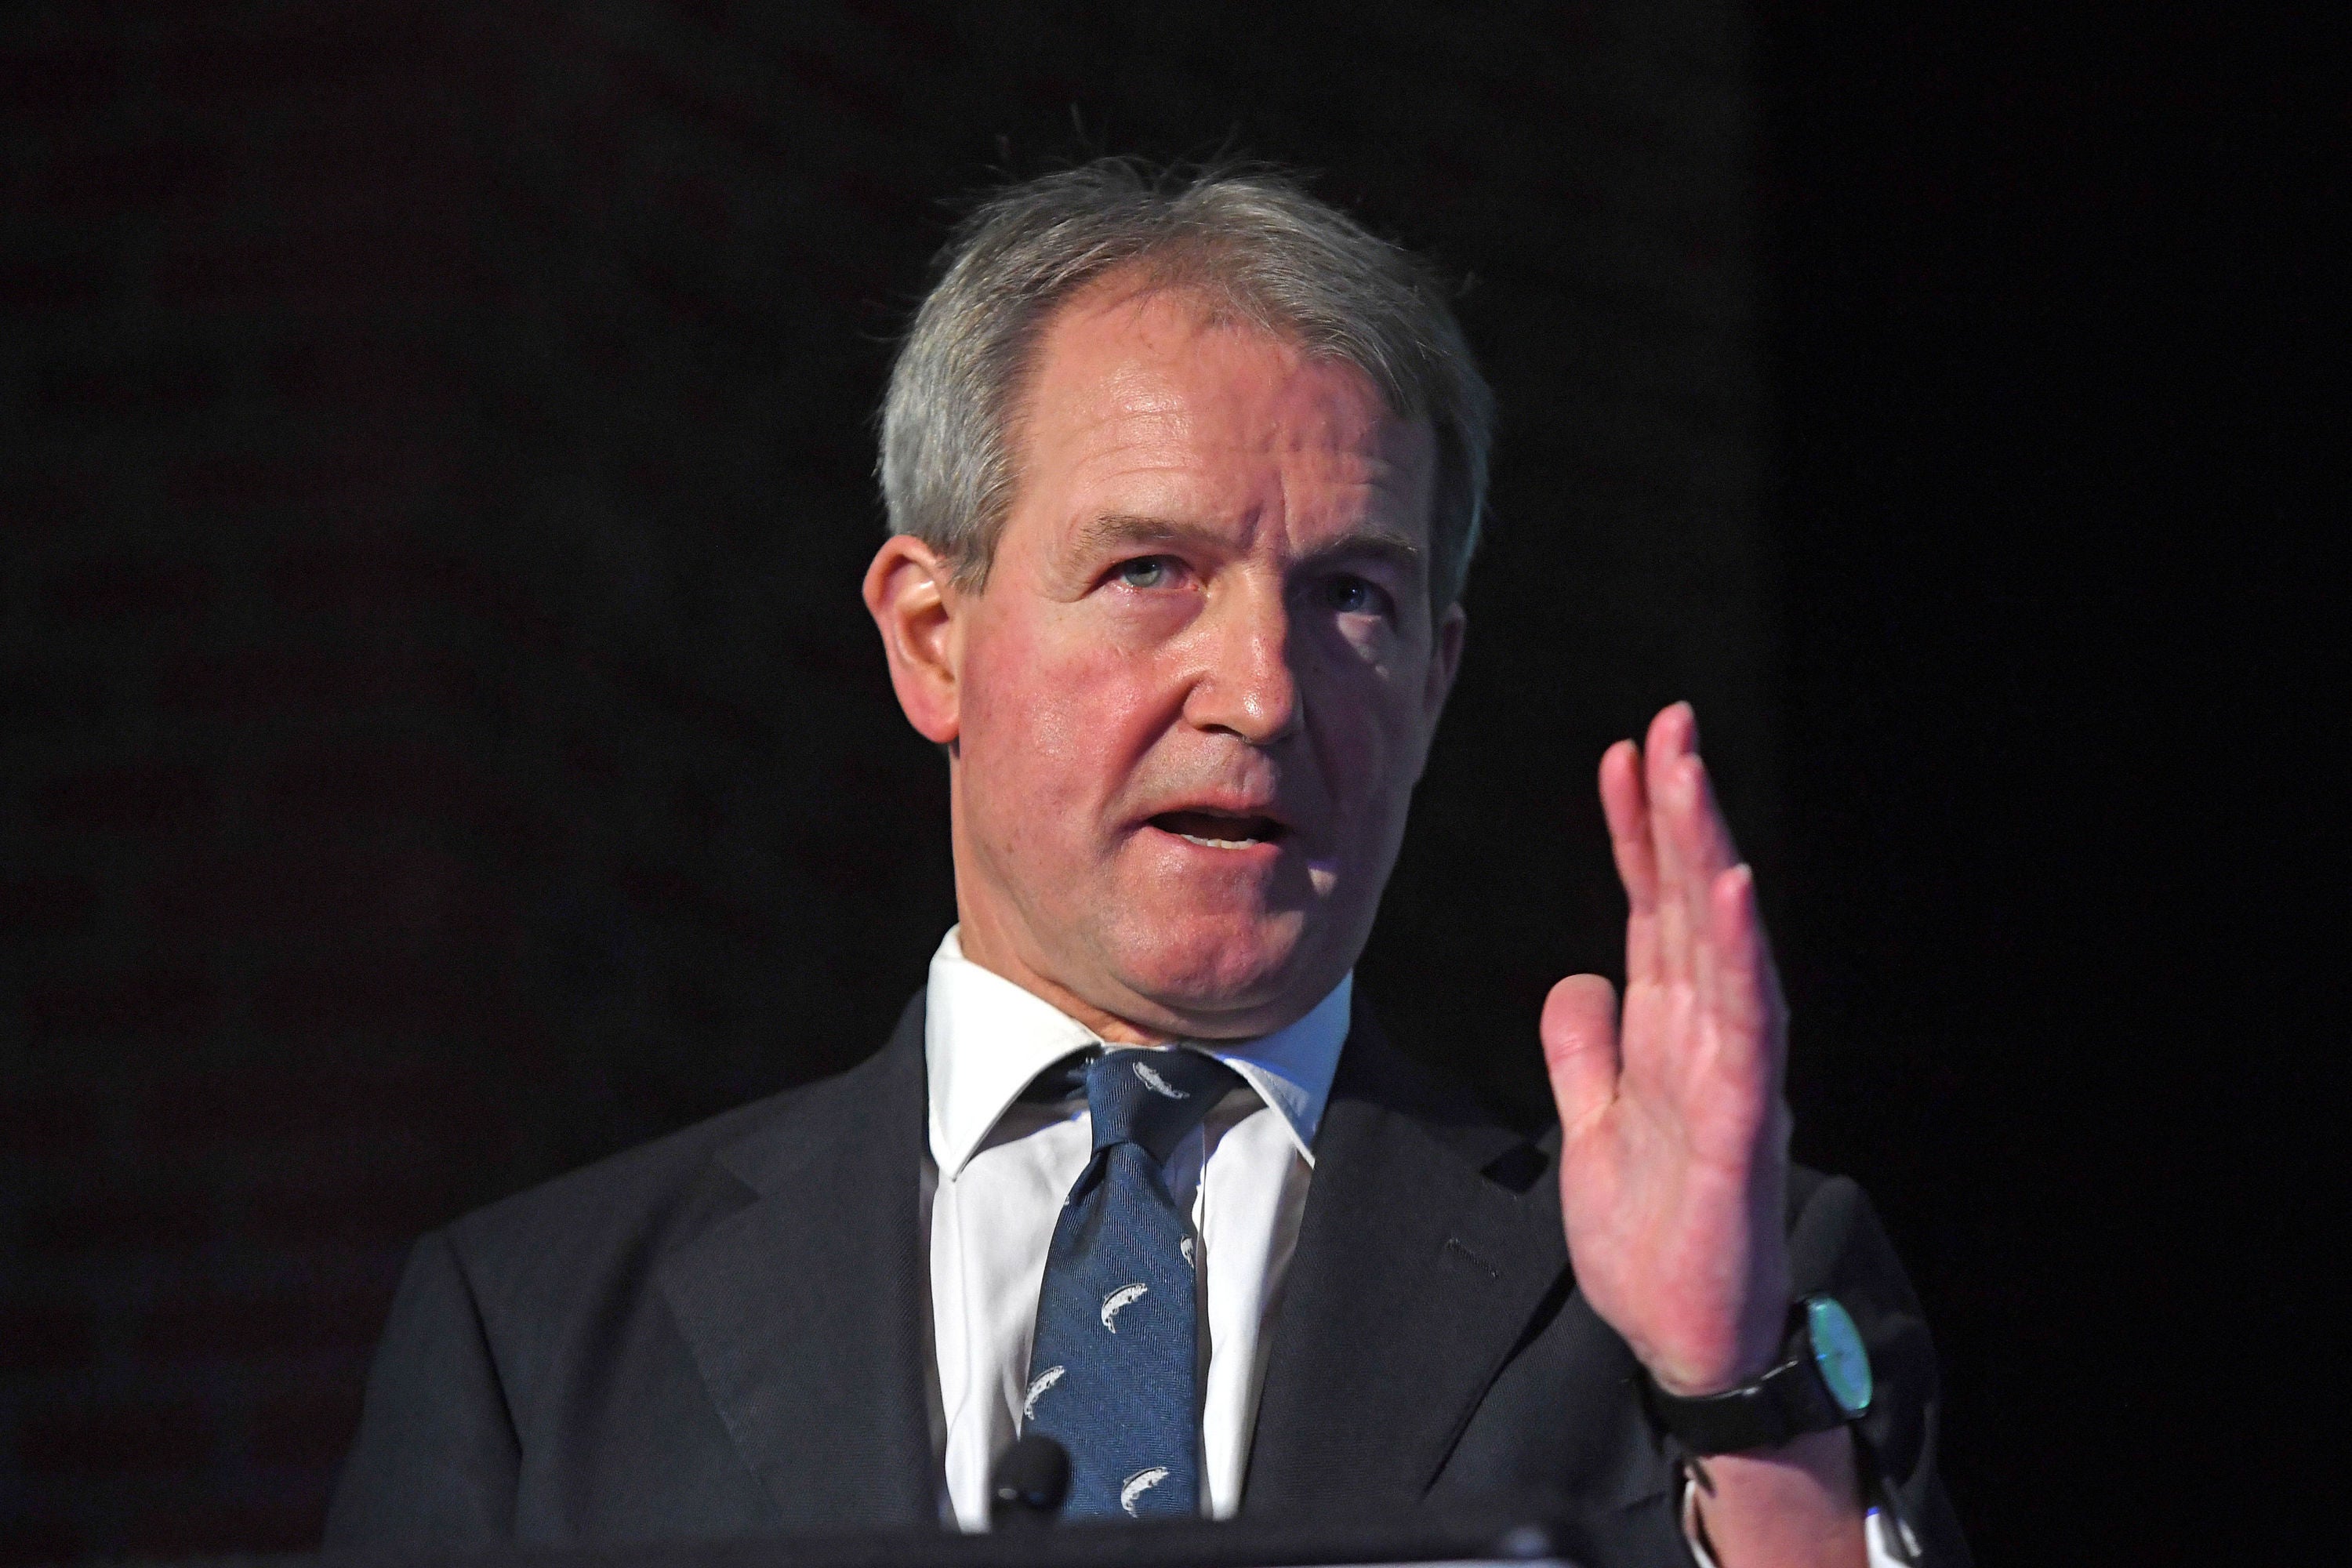 Owen Paterson resigned after being found to have breached lobbying rules